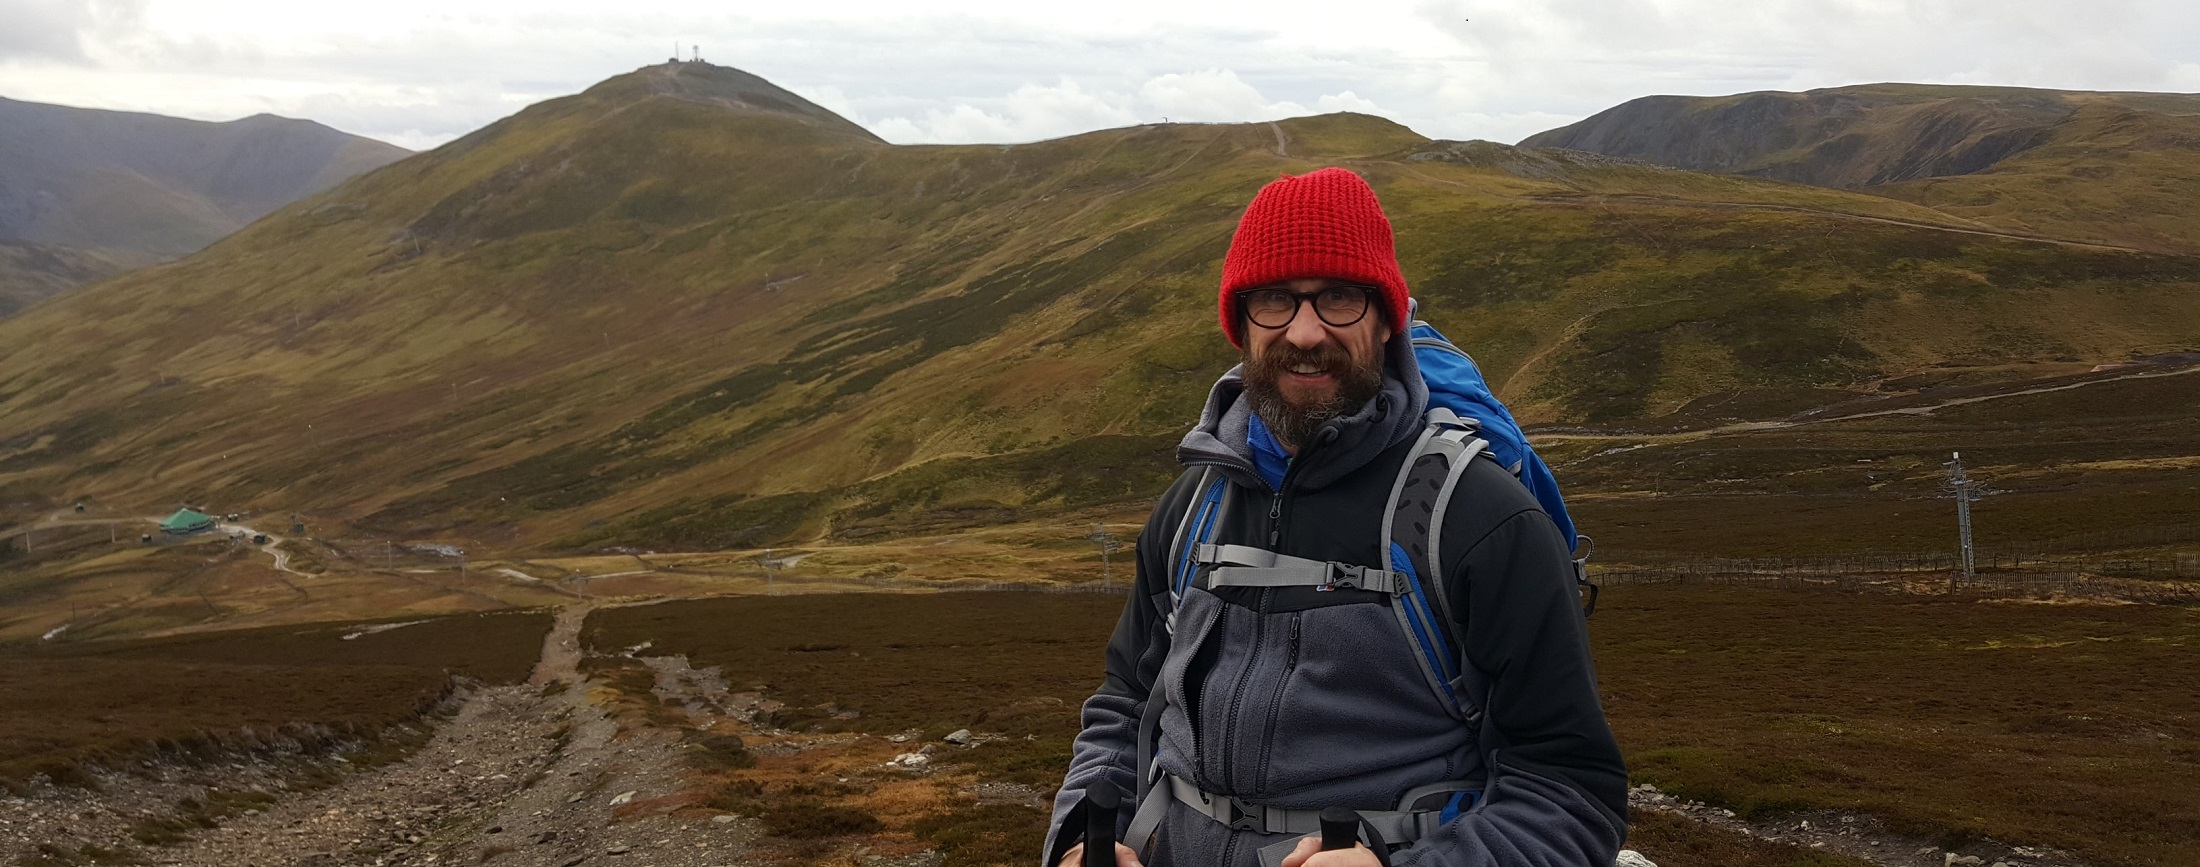 MANAGING DISABILITY AND THE PHYSICAL DEMANDS OF THE SCOTTISH MOUNTAINS